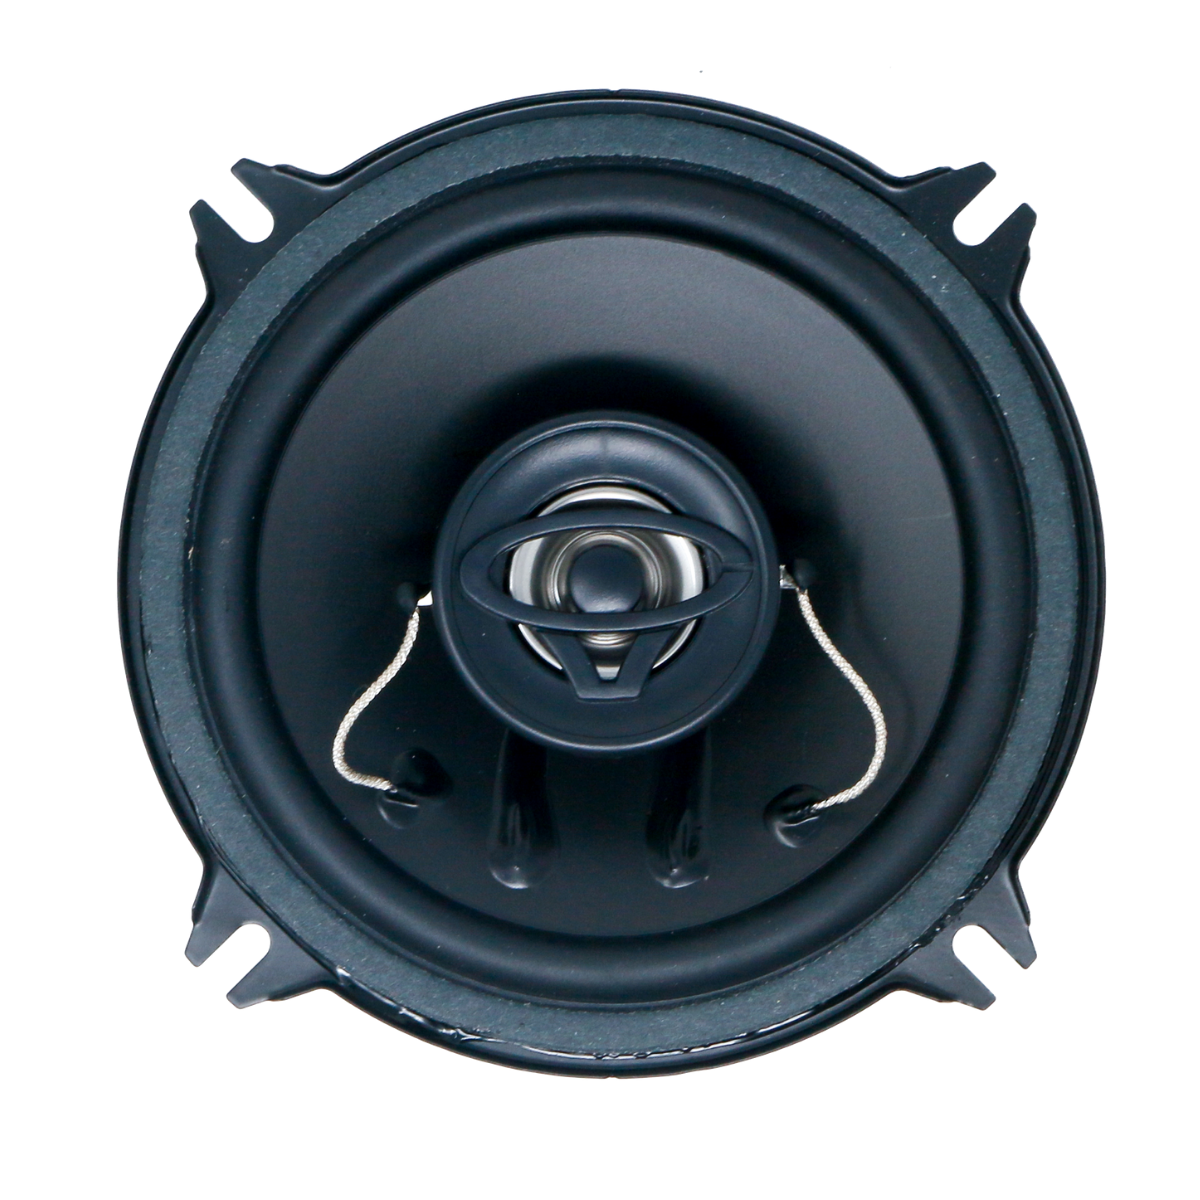 XED52 - 275W 5-1/4" 2-Way XED Series Coaxial Car Speakers